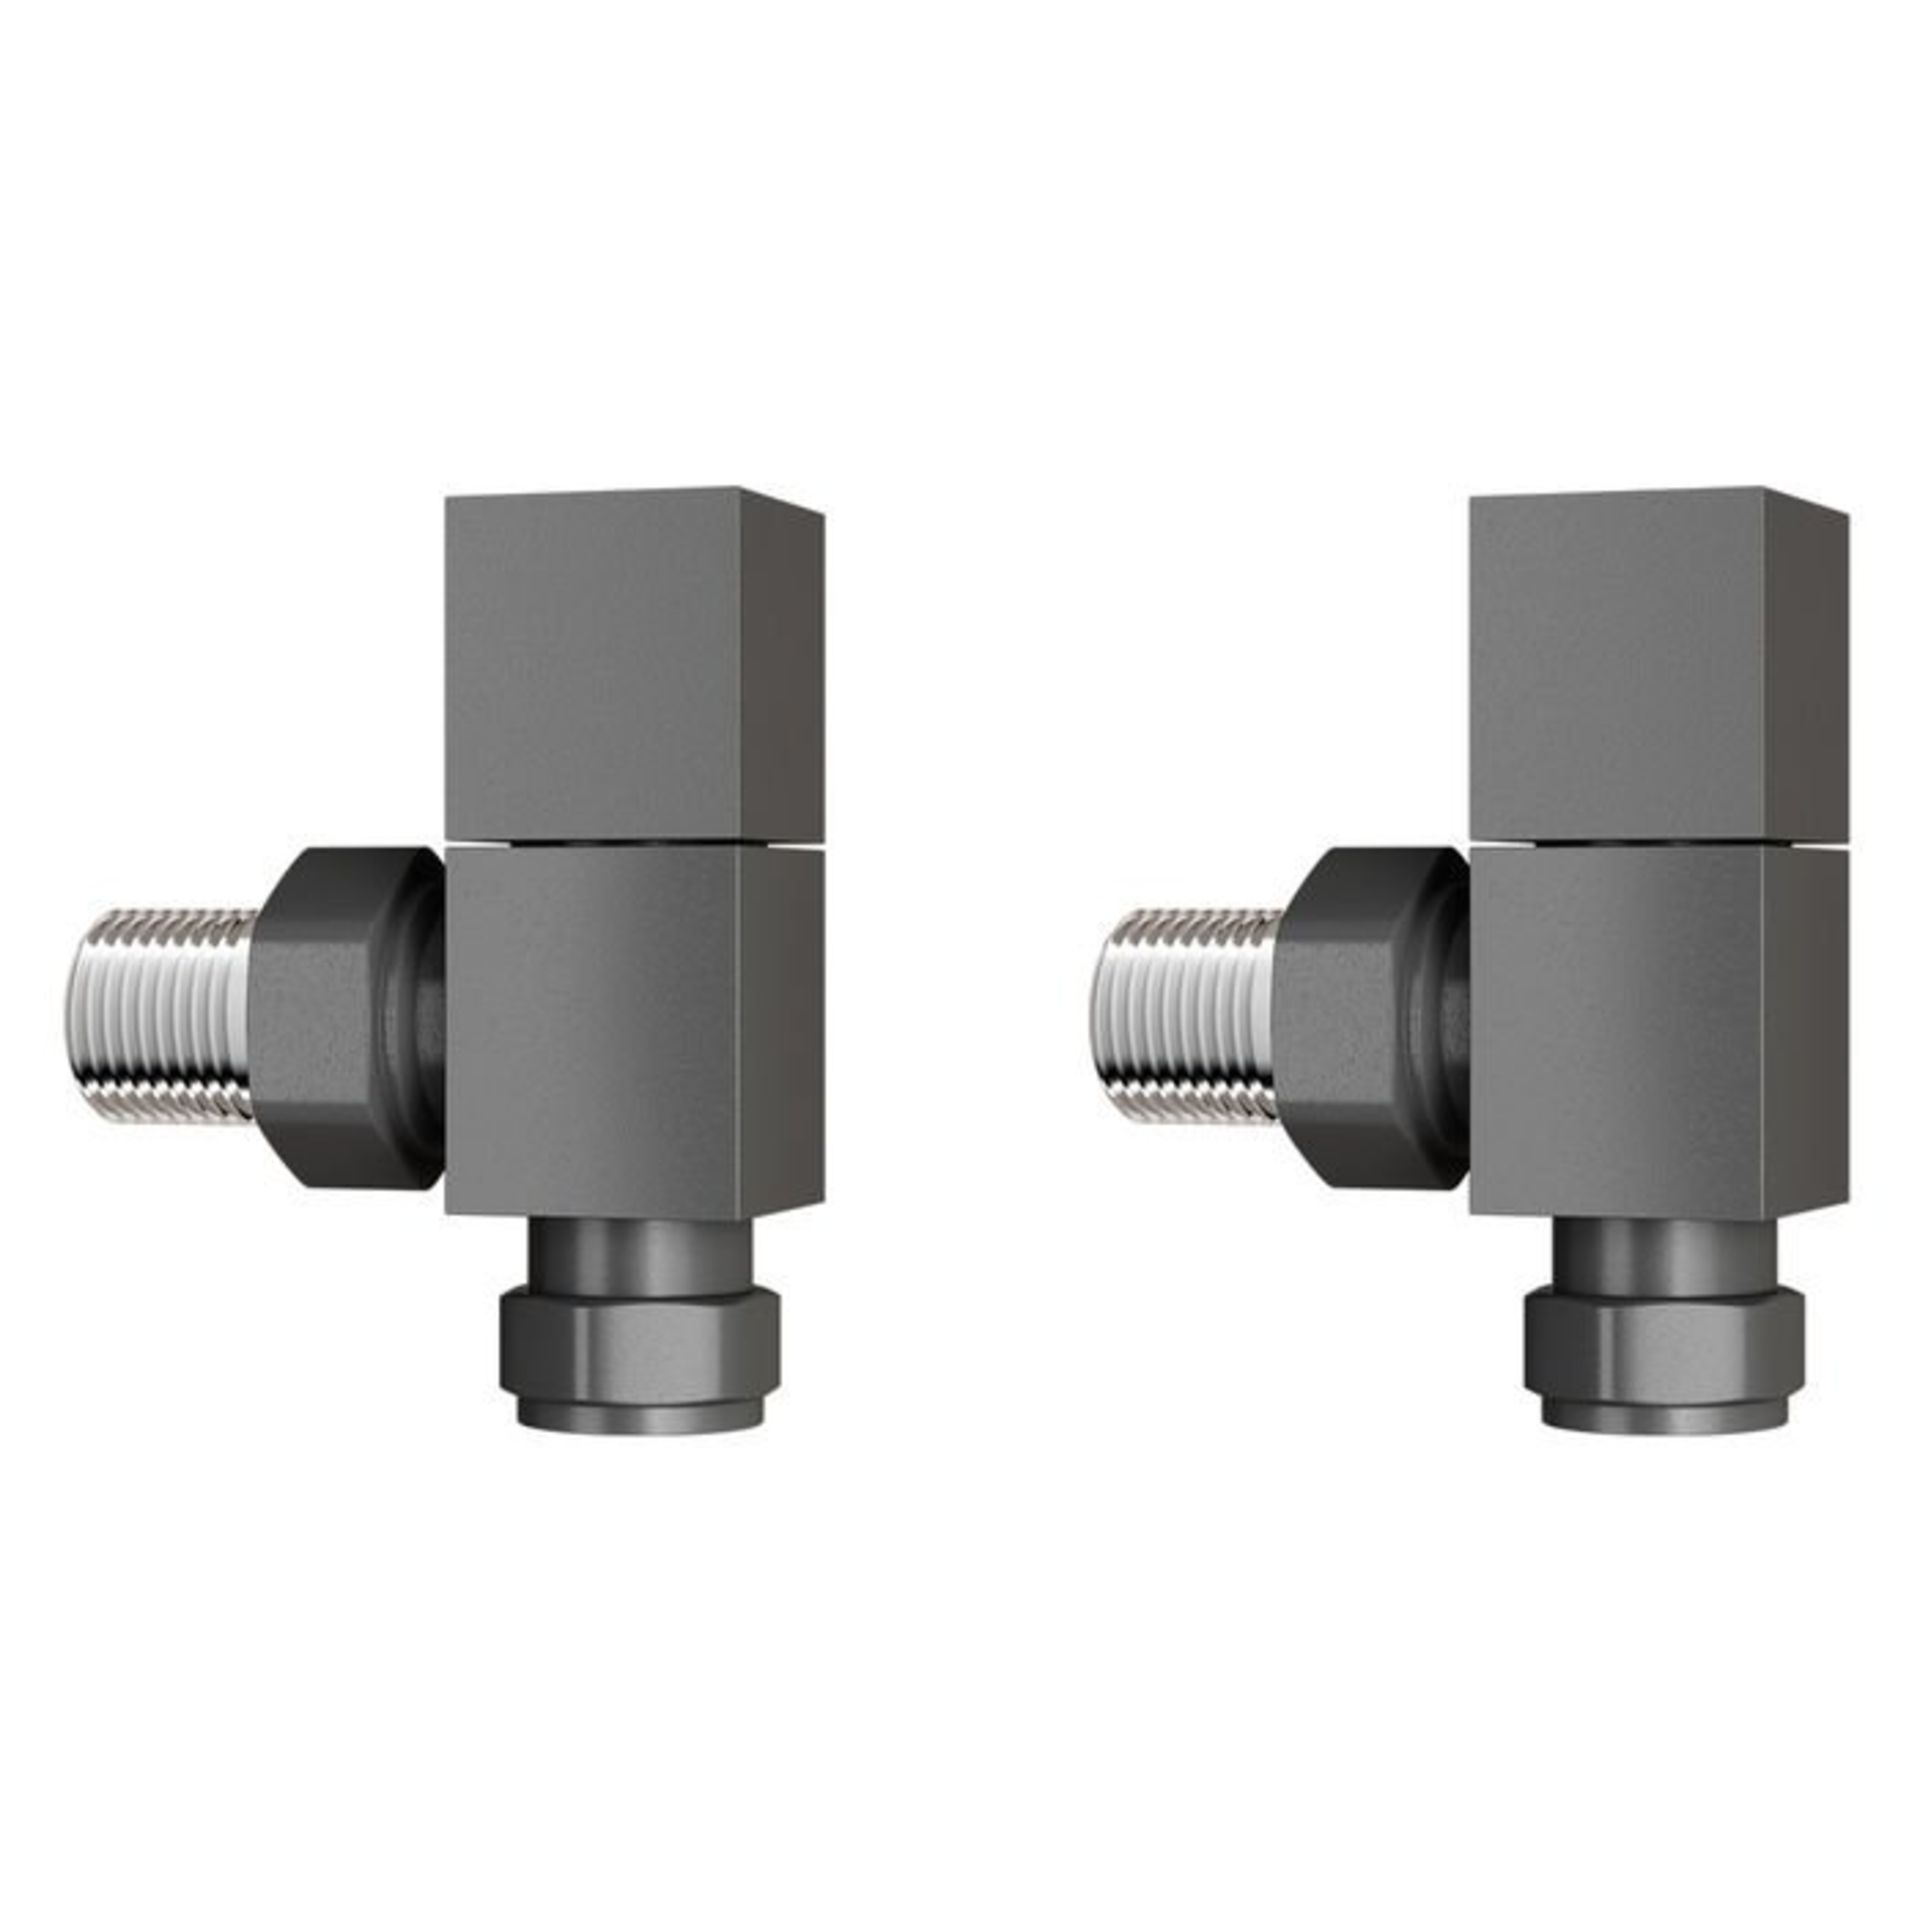 (E97)15mm Standard Connection Square Angled anthracite Radiator Valves Complies with BS2767